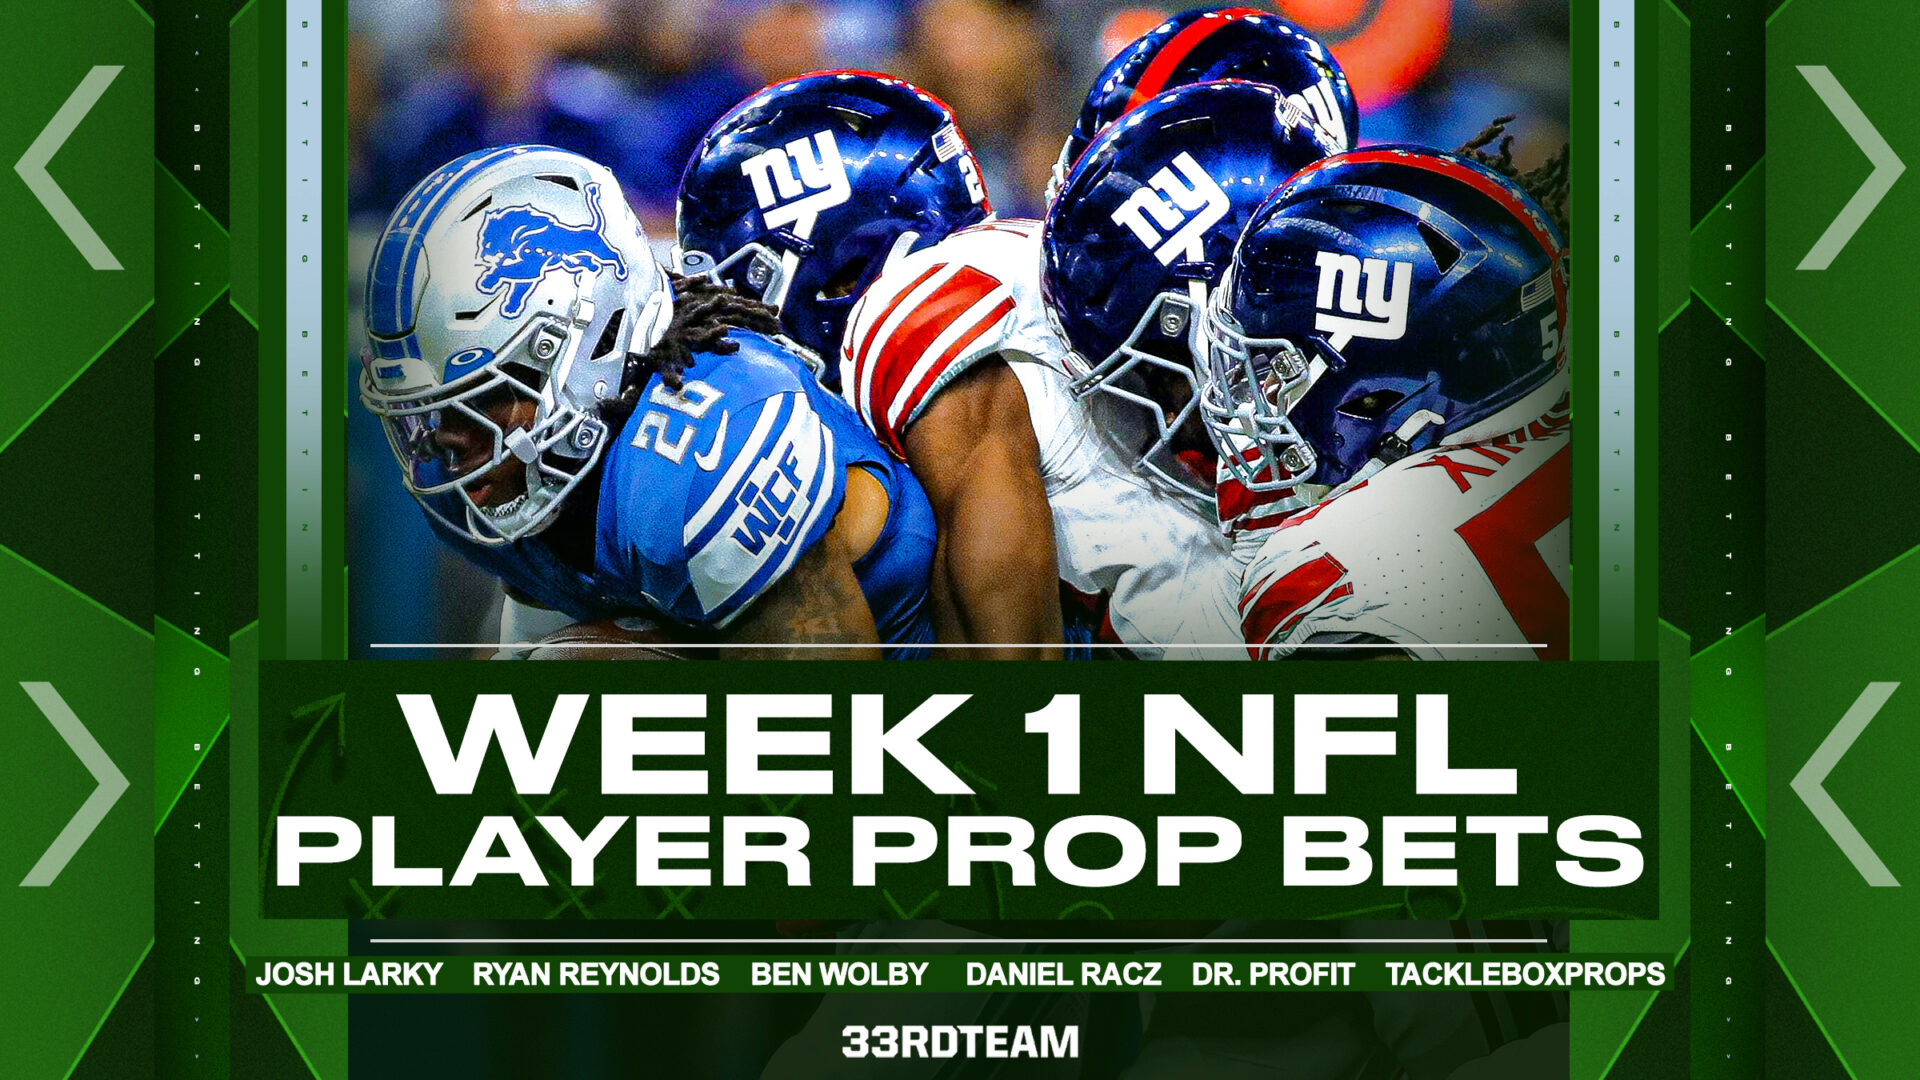 NFL Picks: NFL Best Bets and Player Props for Week 10 at FanDuel Sportsbook